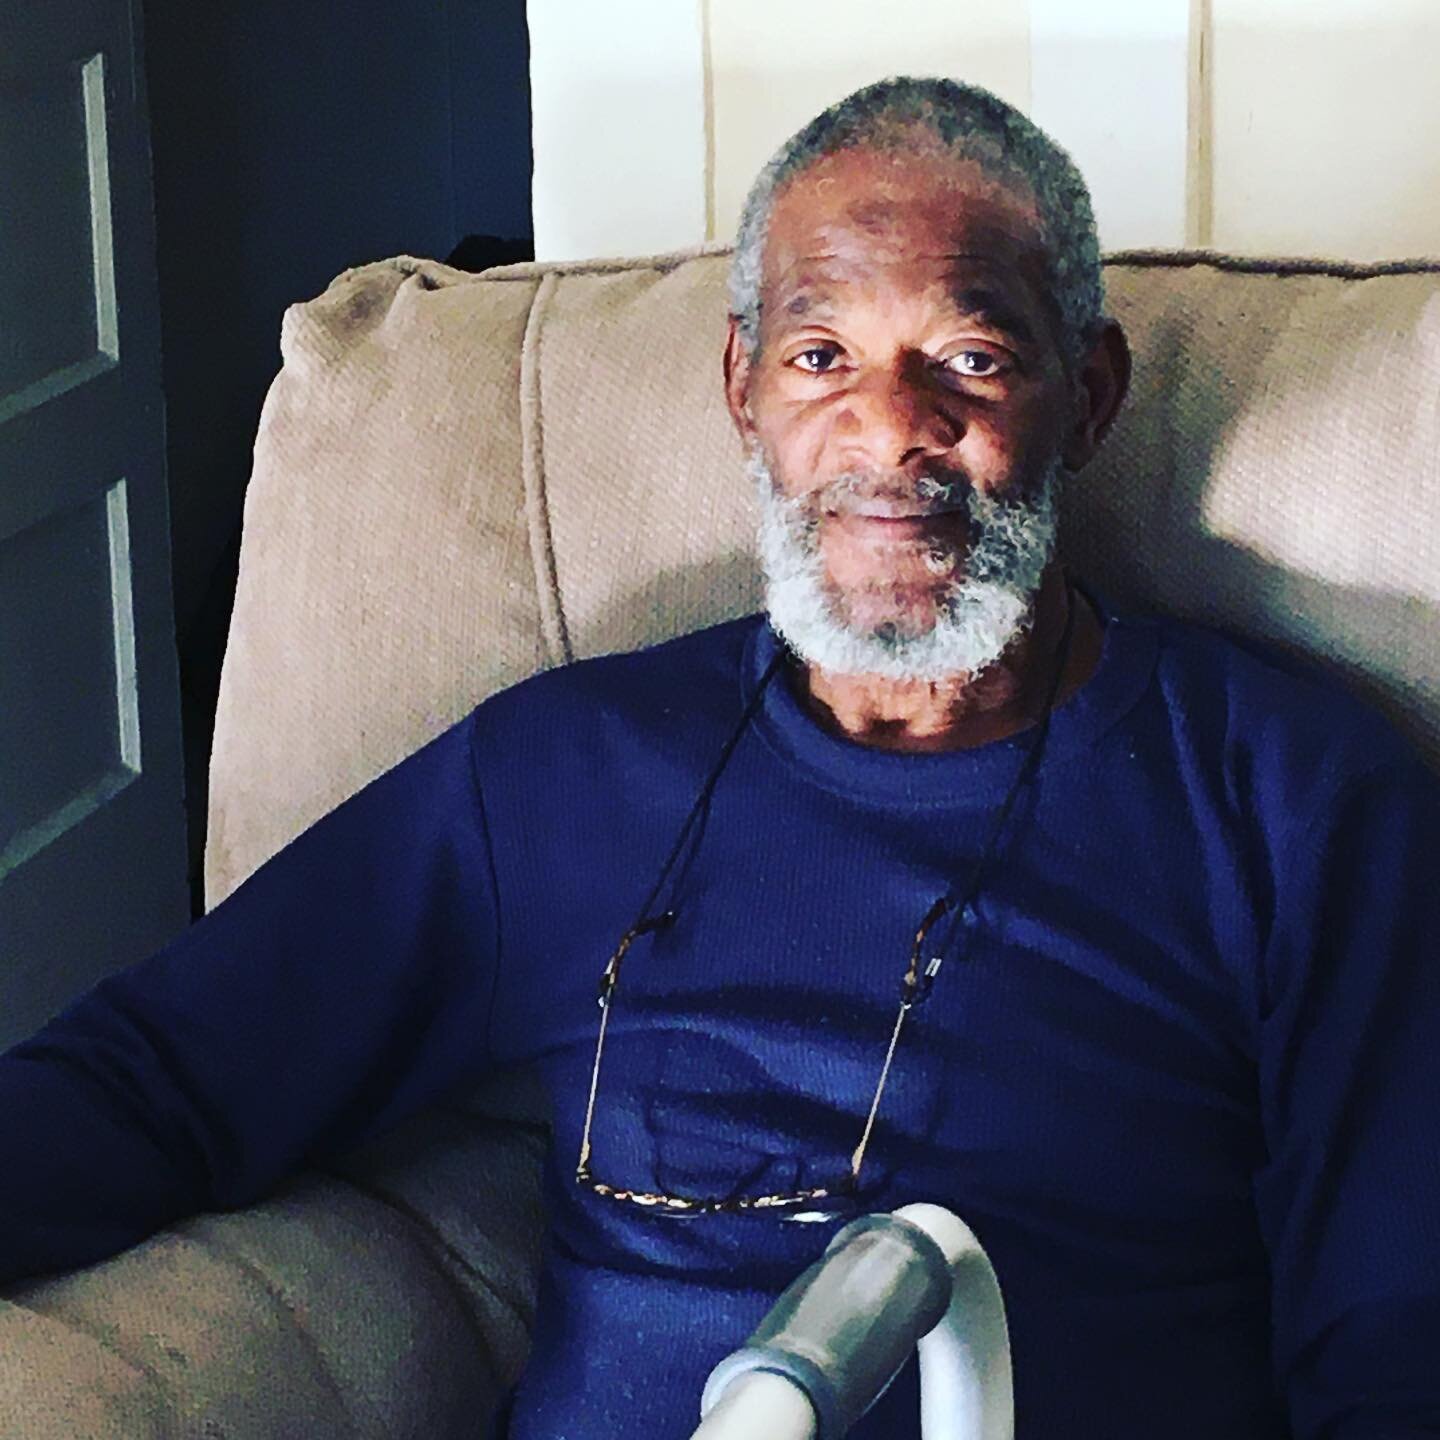 Happy MLK Day! The OTM team is celebrating with some furniture move-ins.

This weekend the Open Table move-in team provided one of our neighbors with a new recliner to sleep in as he recovers from hip surgery. He was recently injured after being hit 